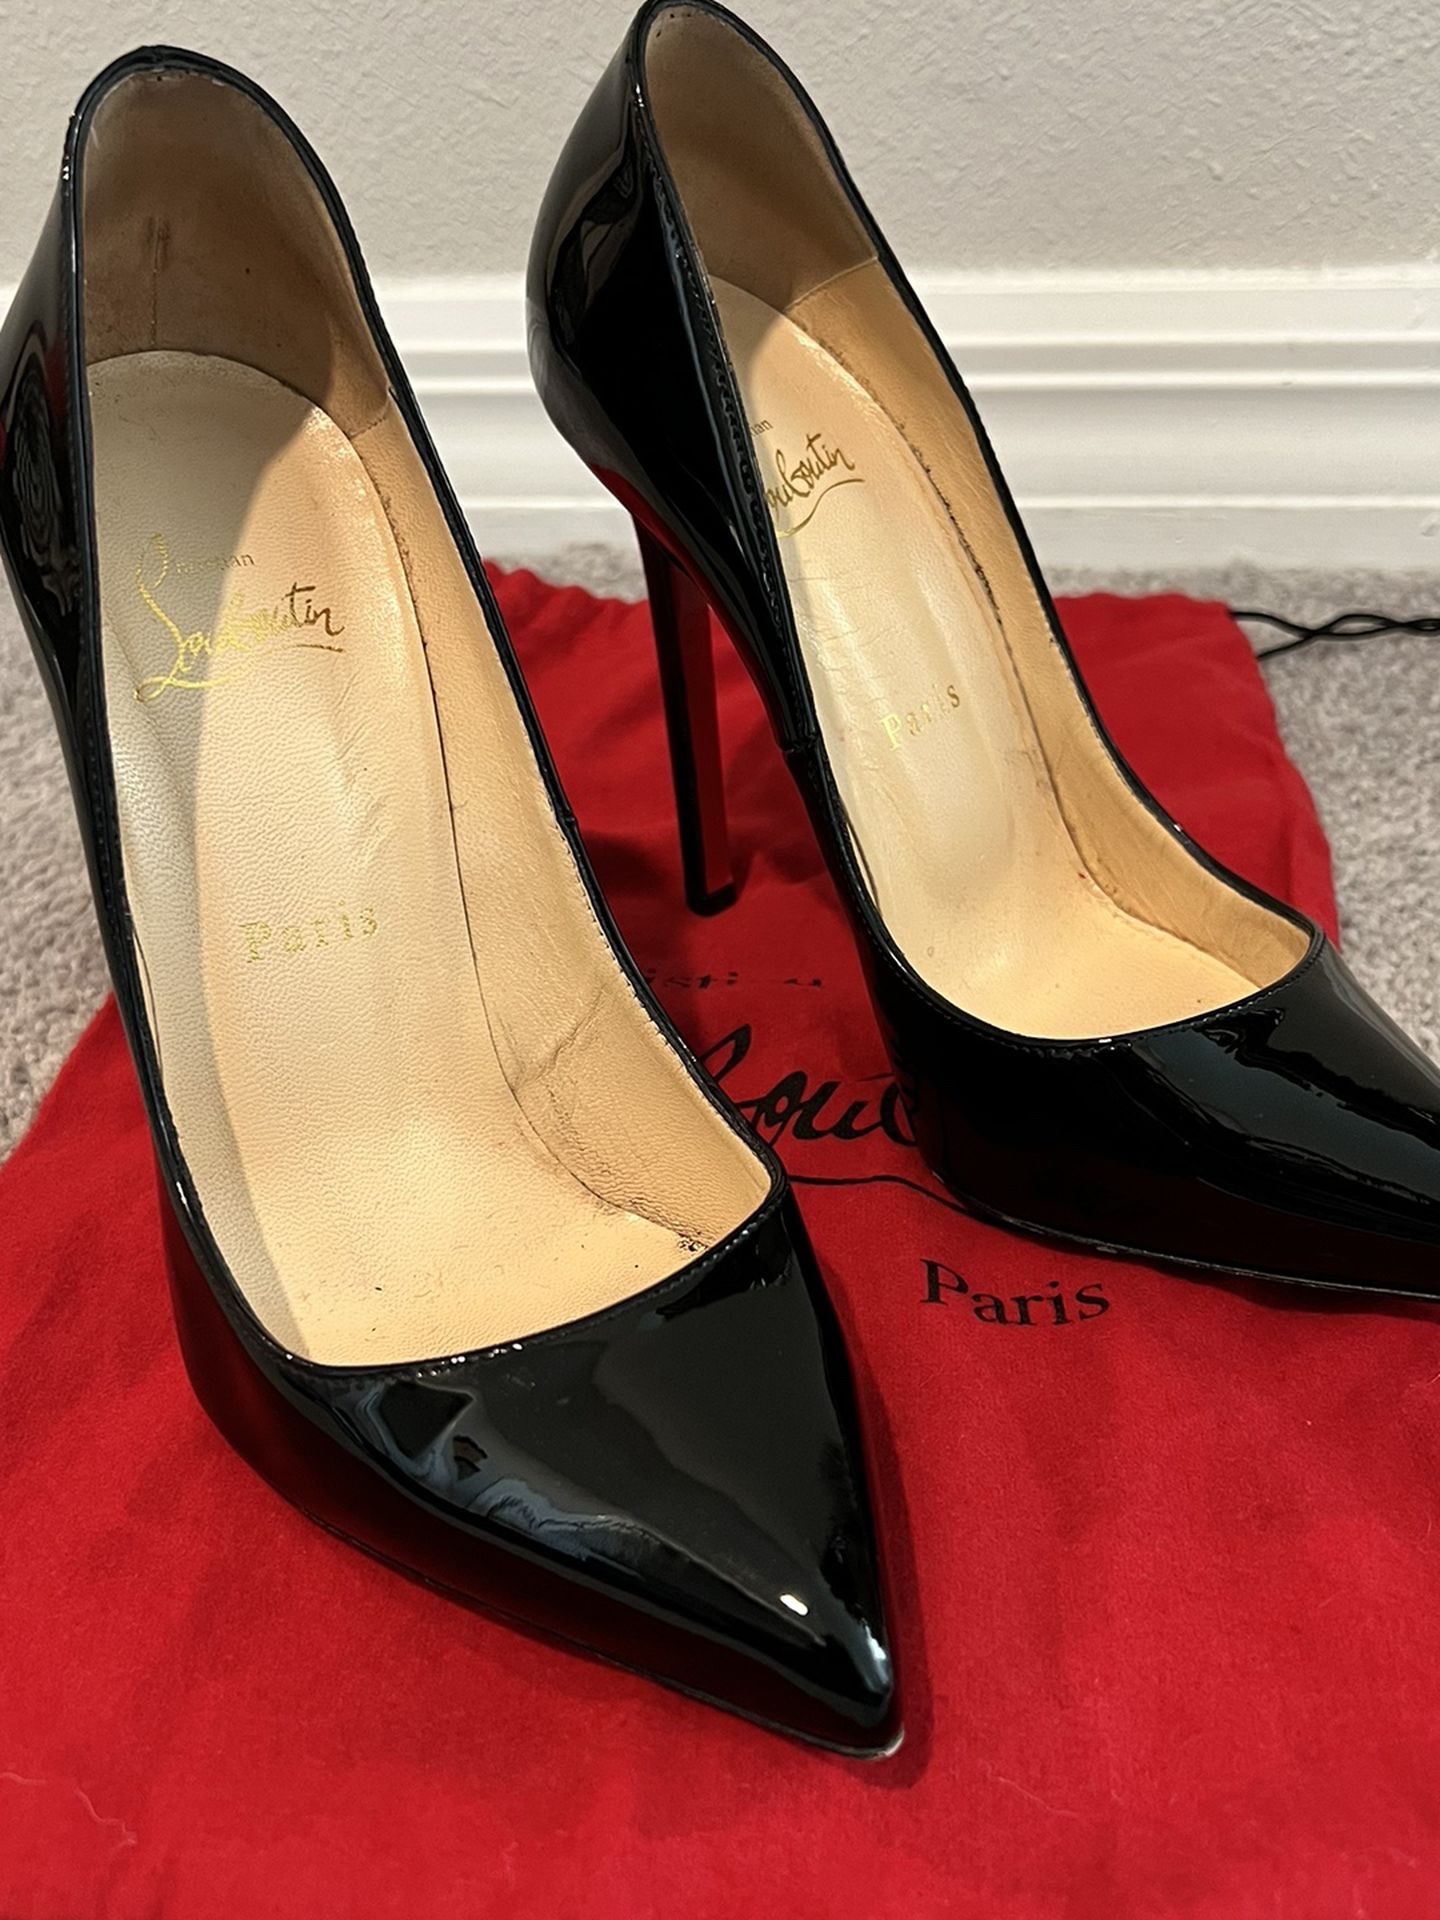 Christian Louboutin Pigalle Size 37.5